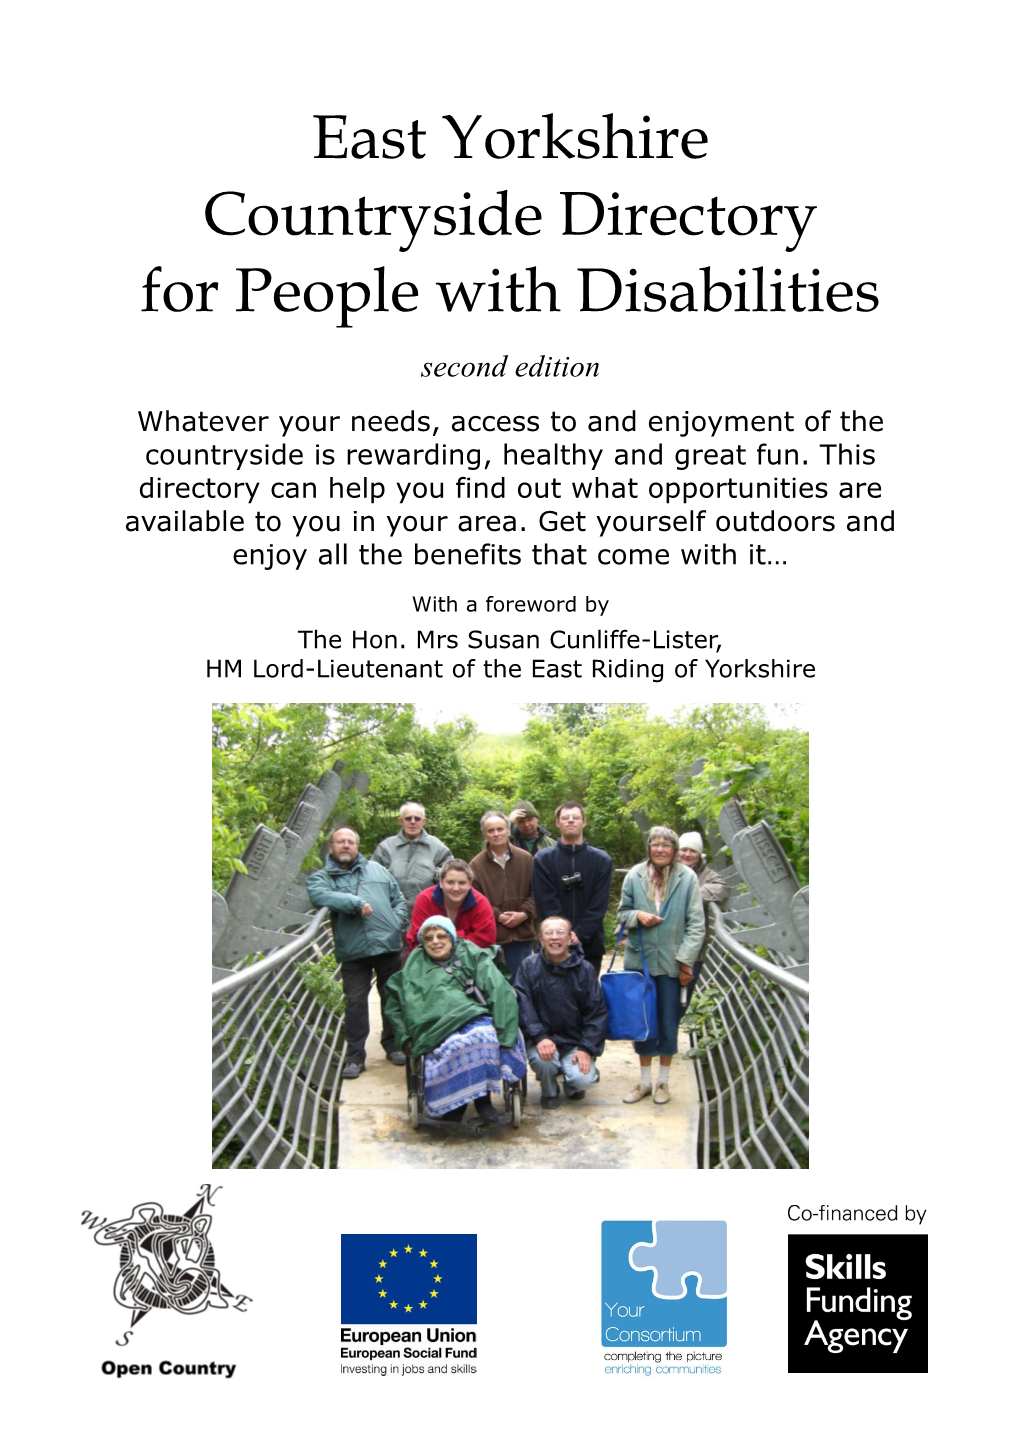 East Yorkshire Countryside Directory for People with Disabilities